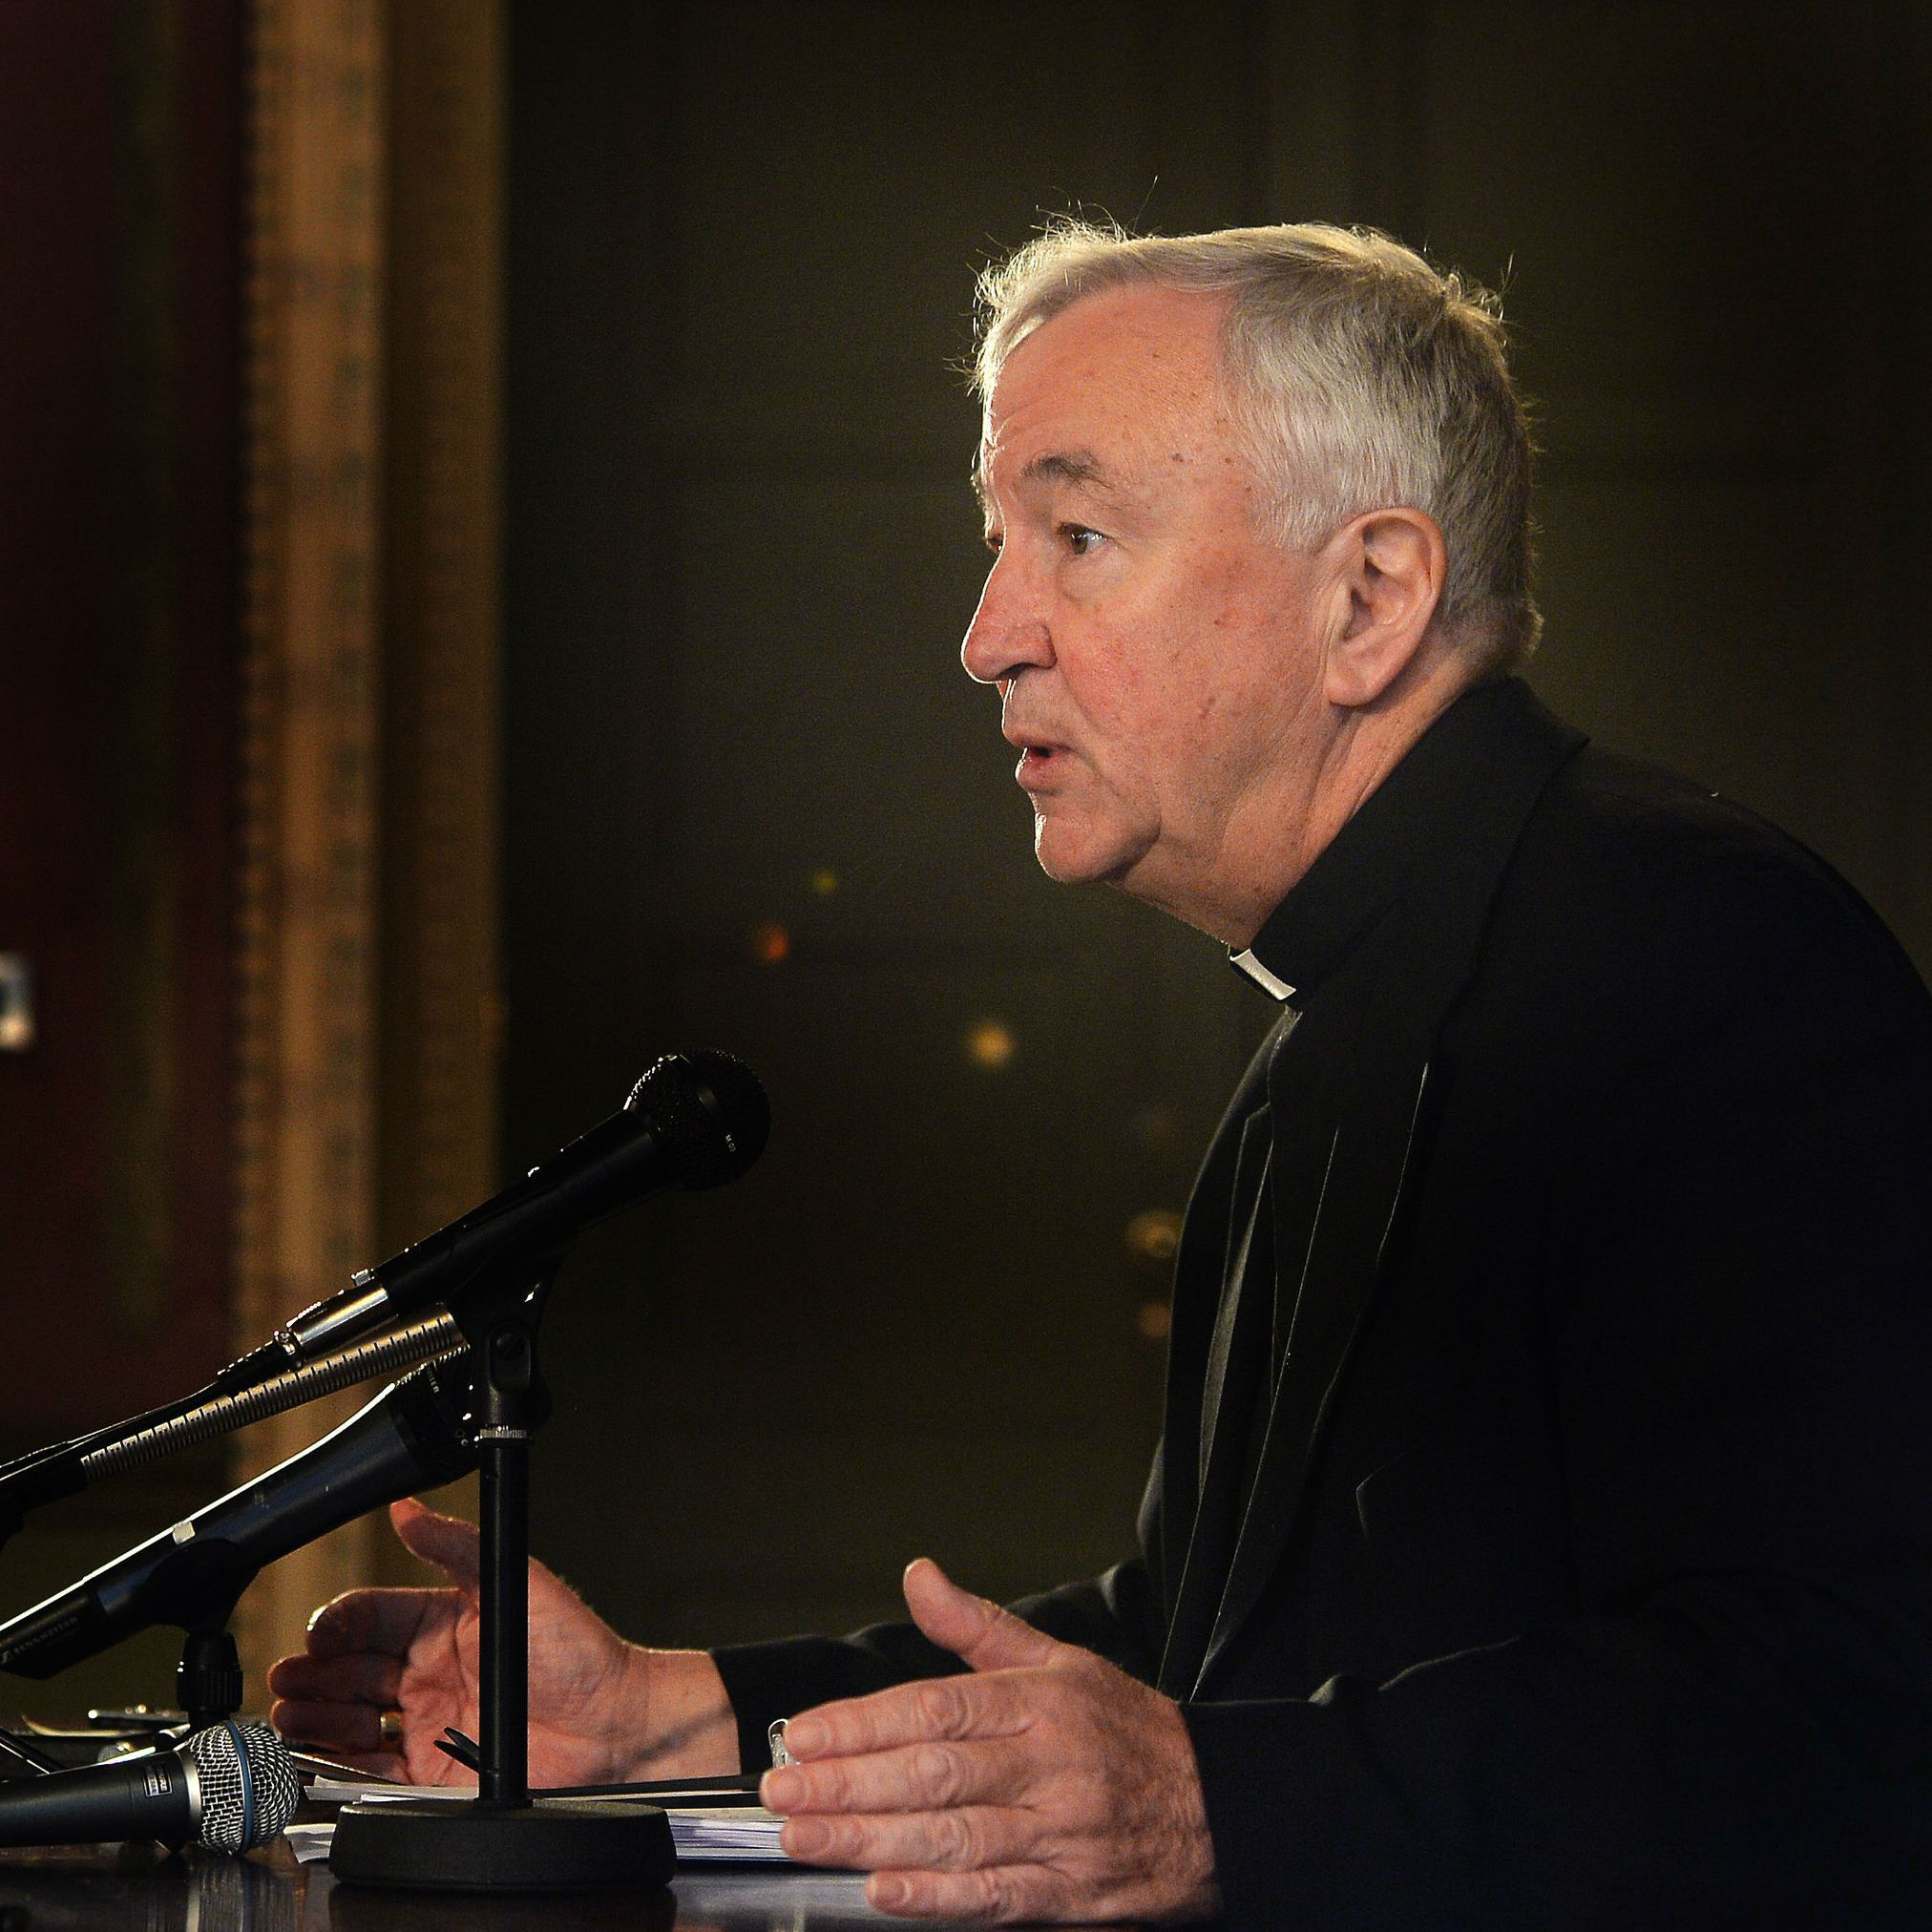 Cardinal Nichols: Human trafficking is an evil that must be stopped